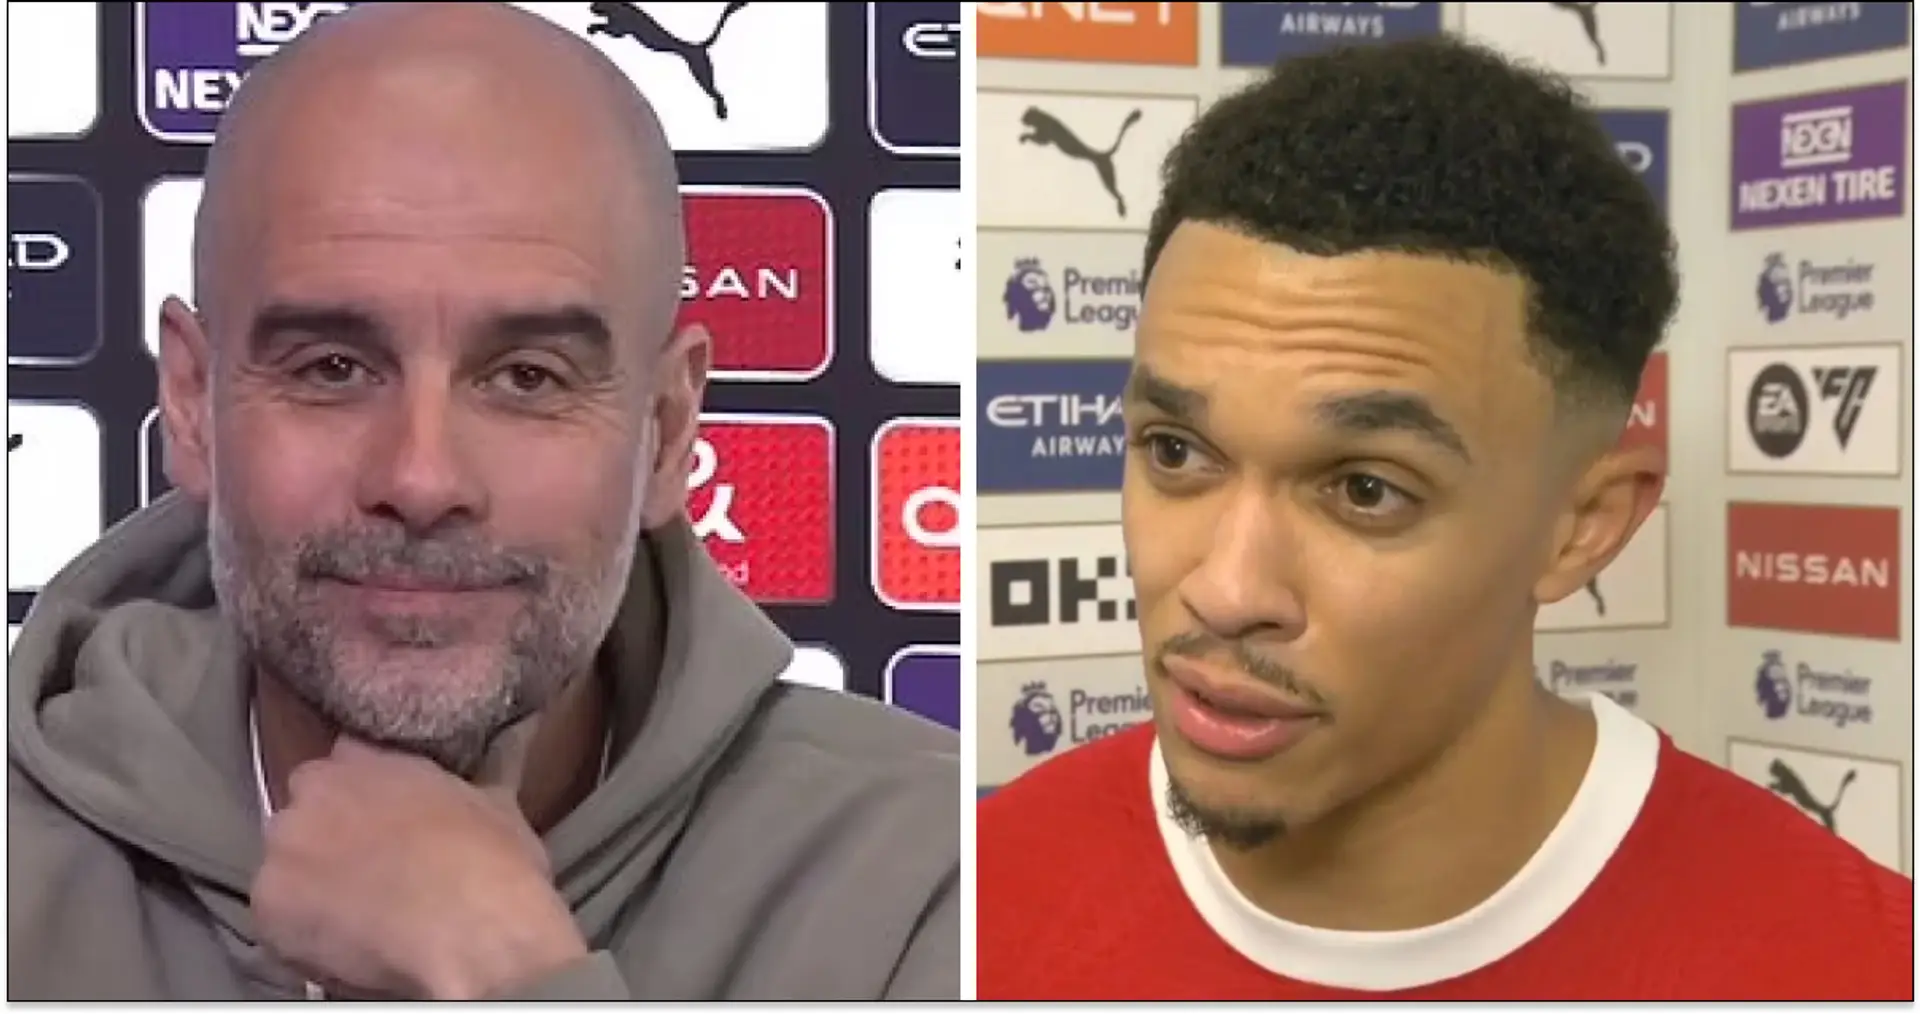 'What he said is what a lot of people think': Guardiola on Trent's 'trophies' comment